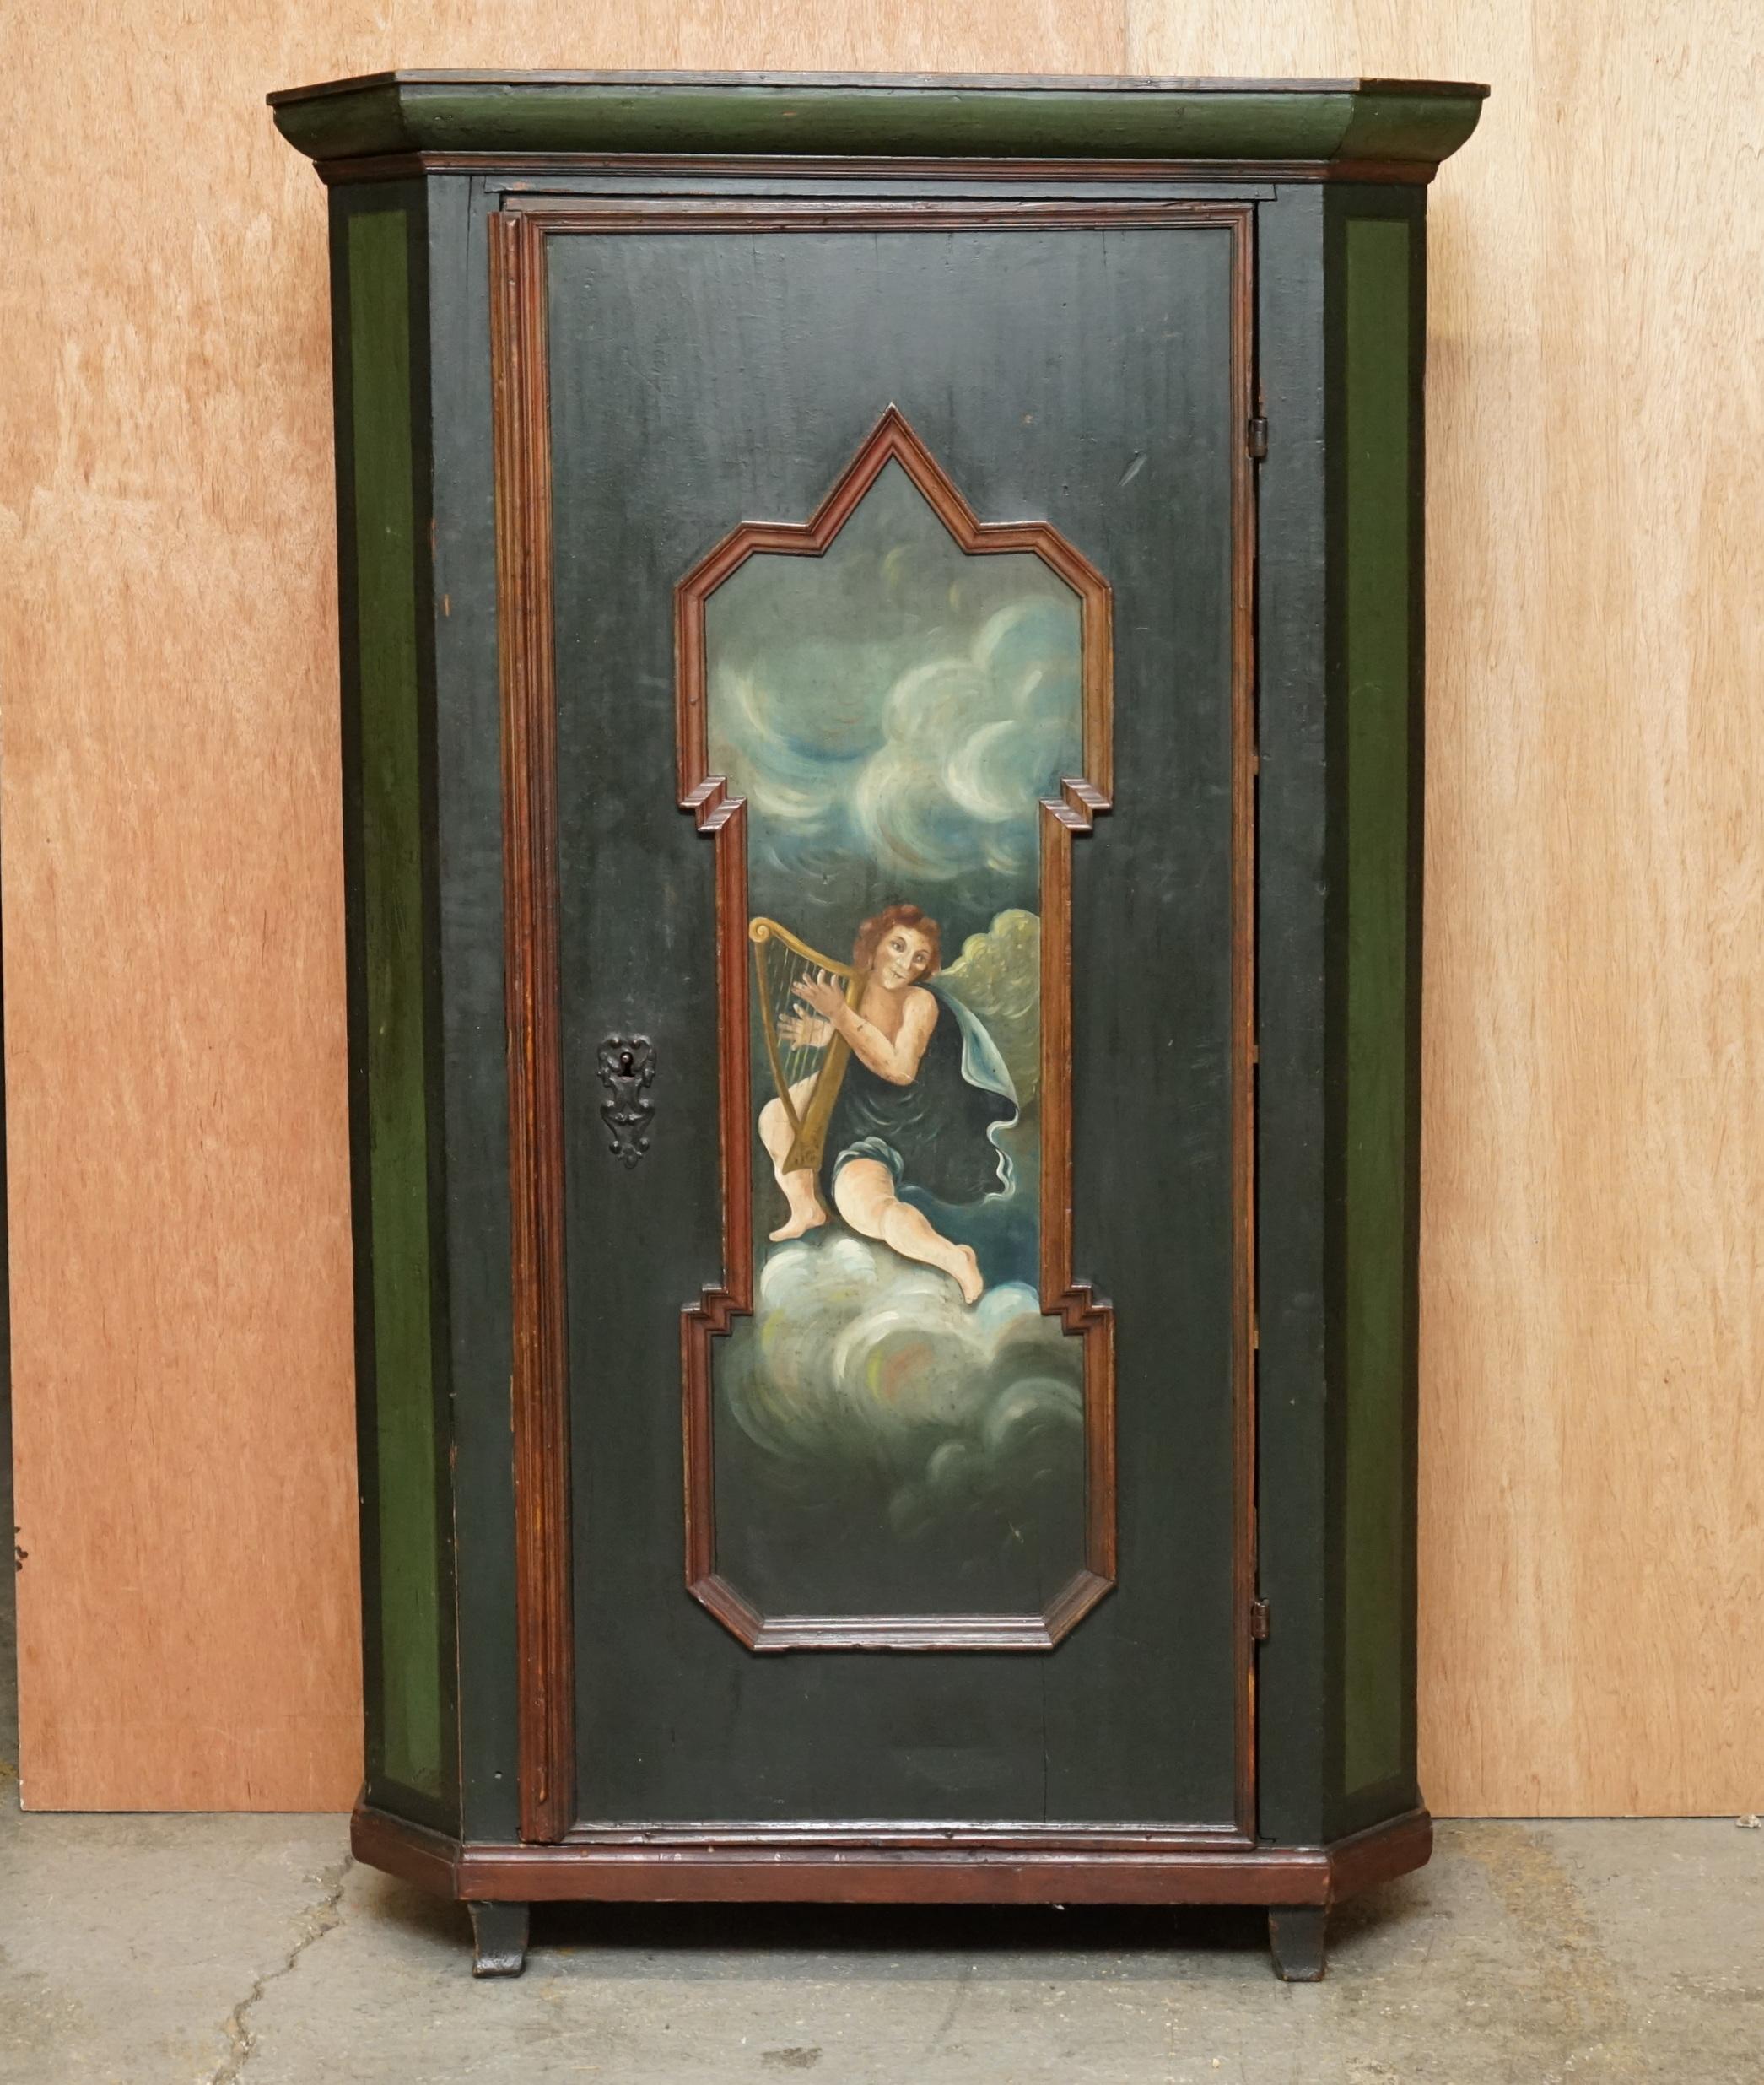 We are delighted to offer for sale this stunning original Swedish circa 1800 hand painted green with angel playing a harp decoration hall cupboard or wardrobe

A very good looking well made and collectable cupboard. Made for the hall as a cloak